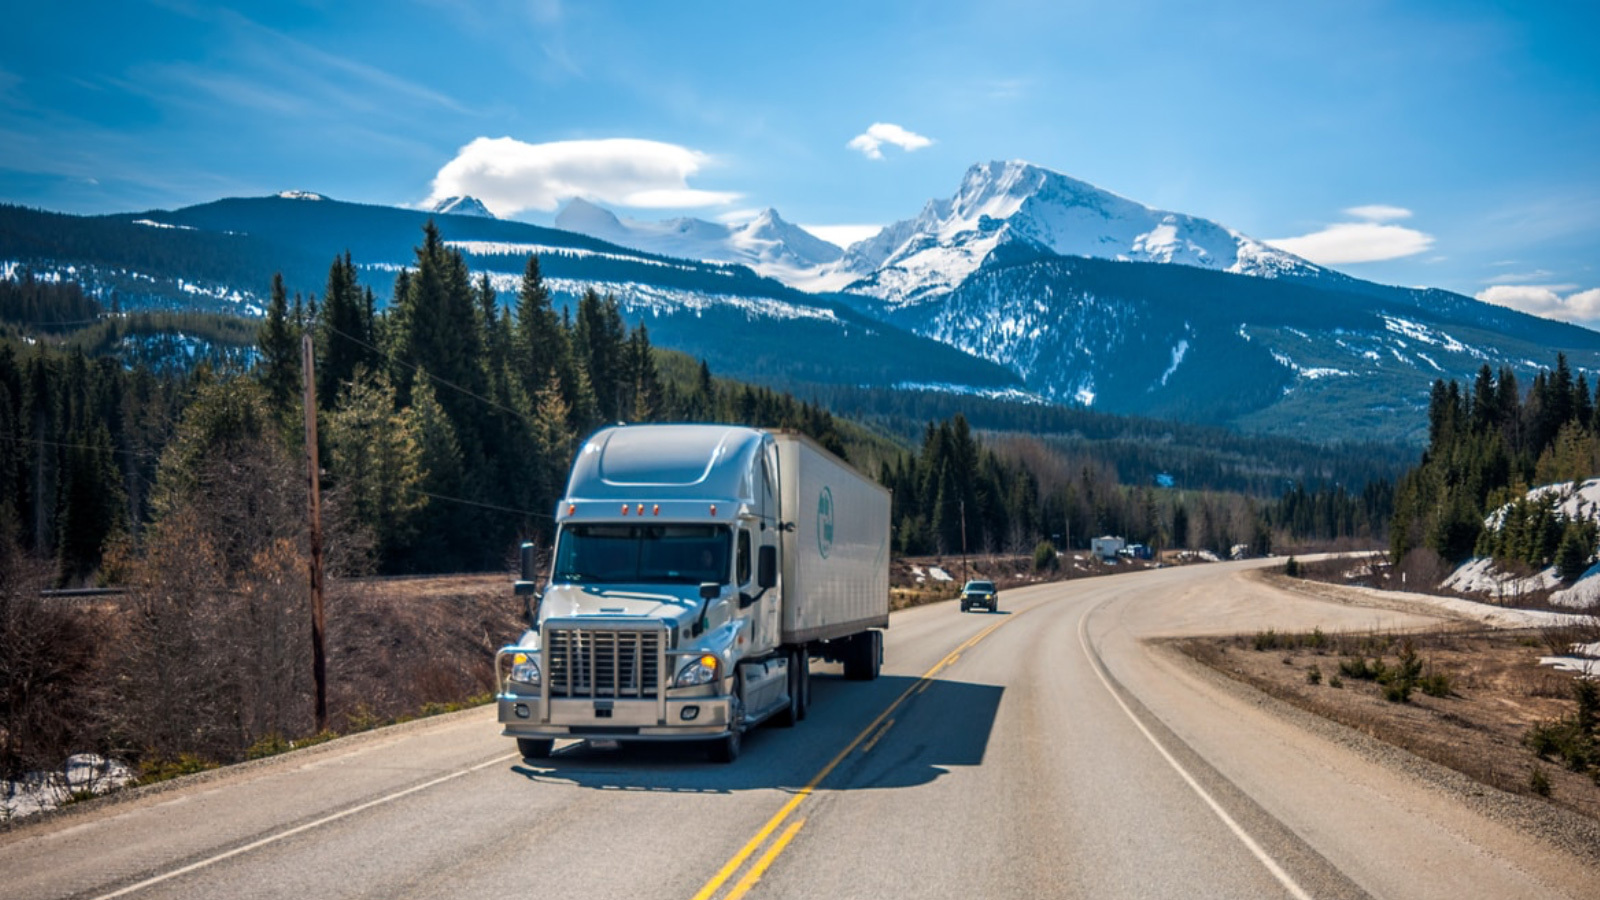 Freight truck traveling down open road with snow-peaked mountains in the background